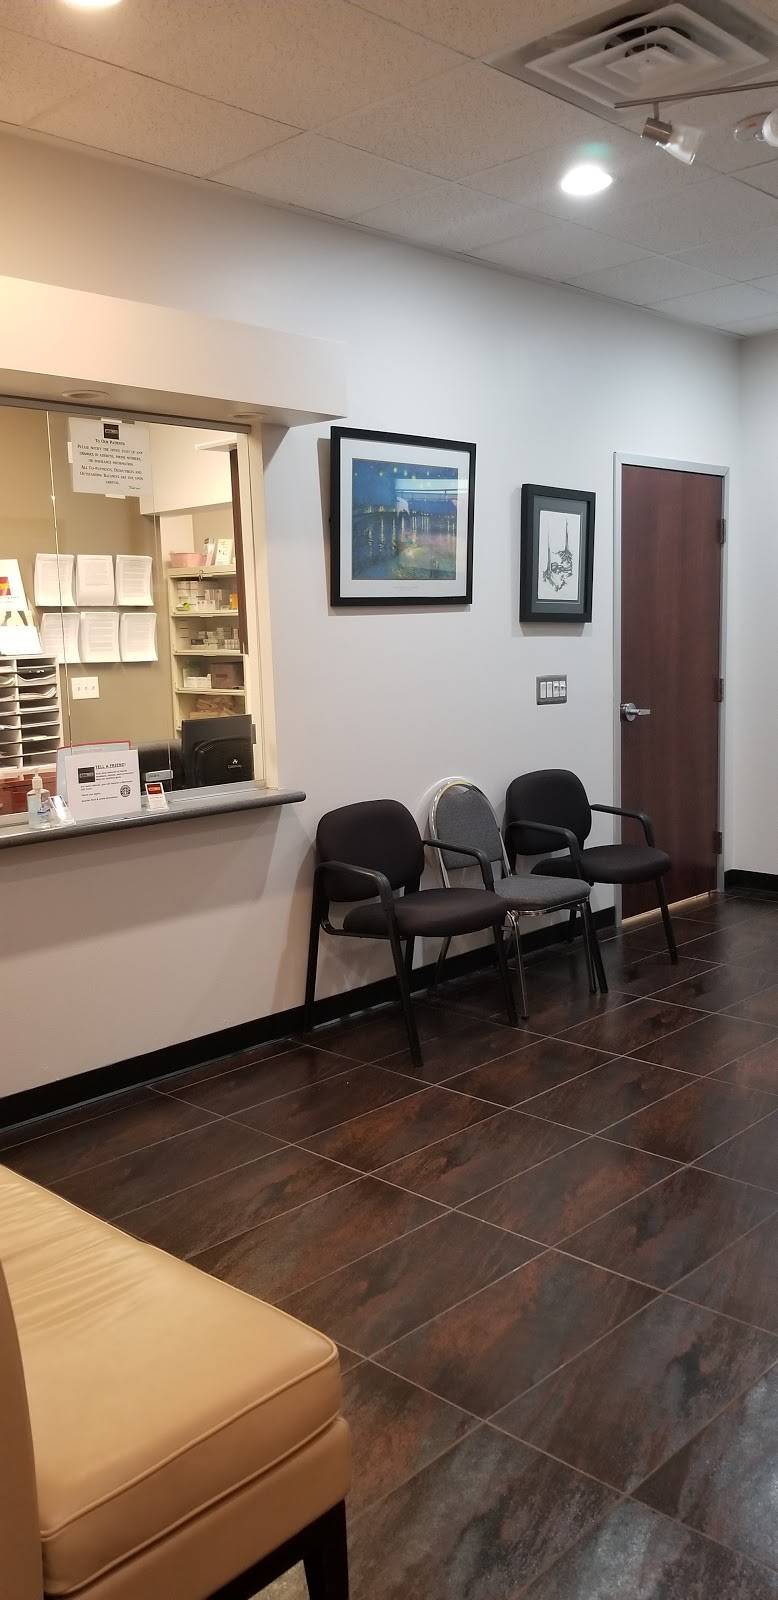 Apache Foot & Ankle Specialists | 8530 W Sunset Rd #345, Las Vegas, NV 89113, USA | Phone: (702) 362-2622